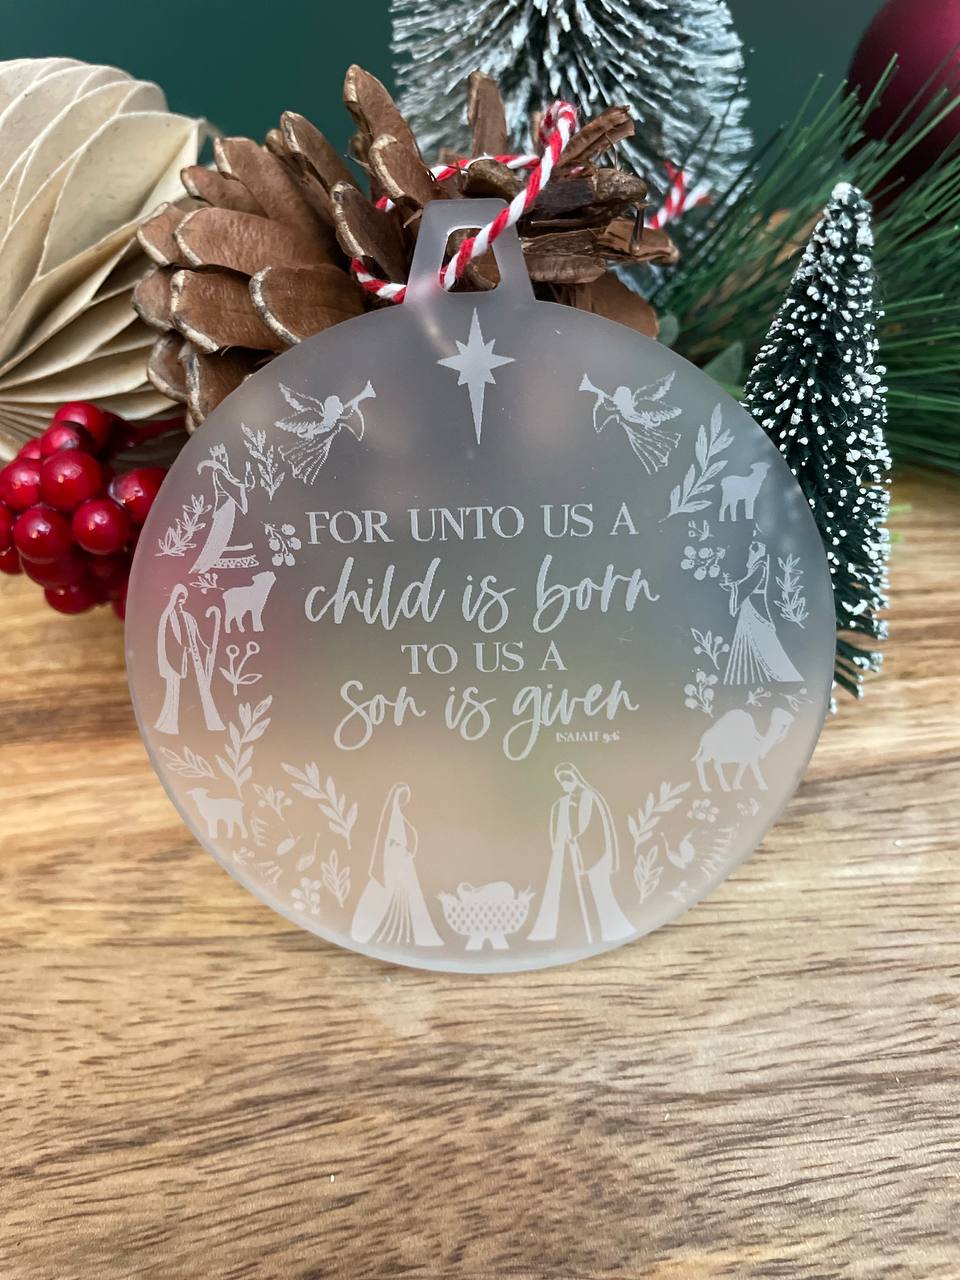 A child is born Isaiah 9:6 frosted ornament